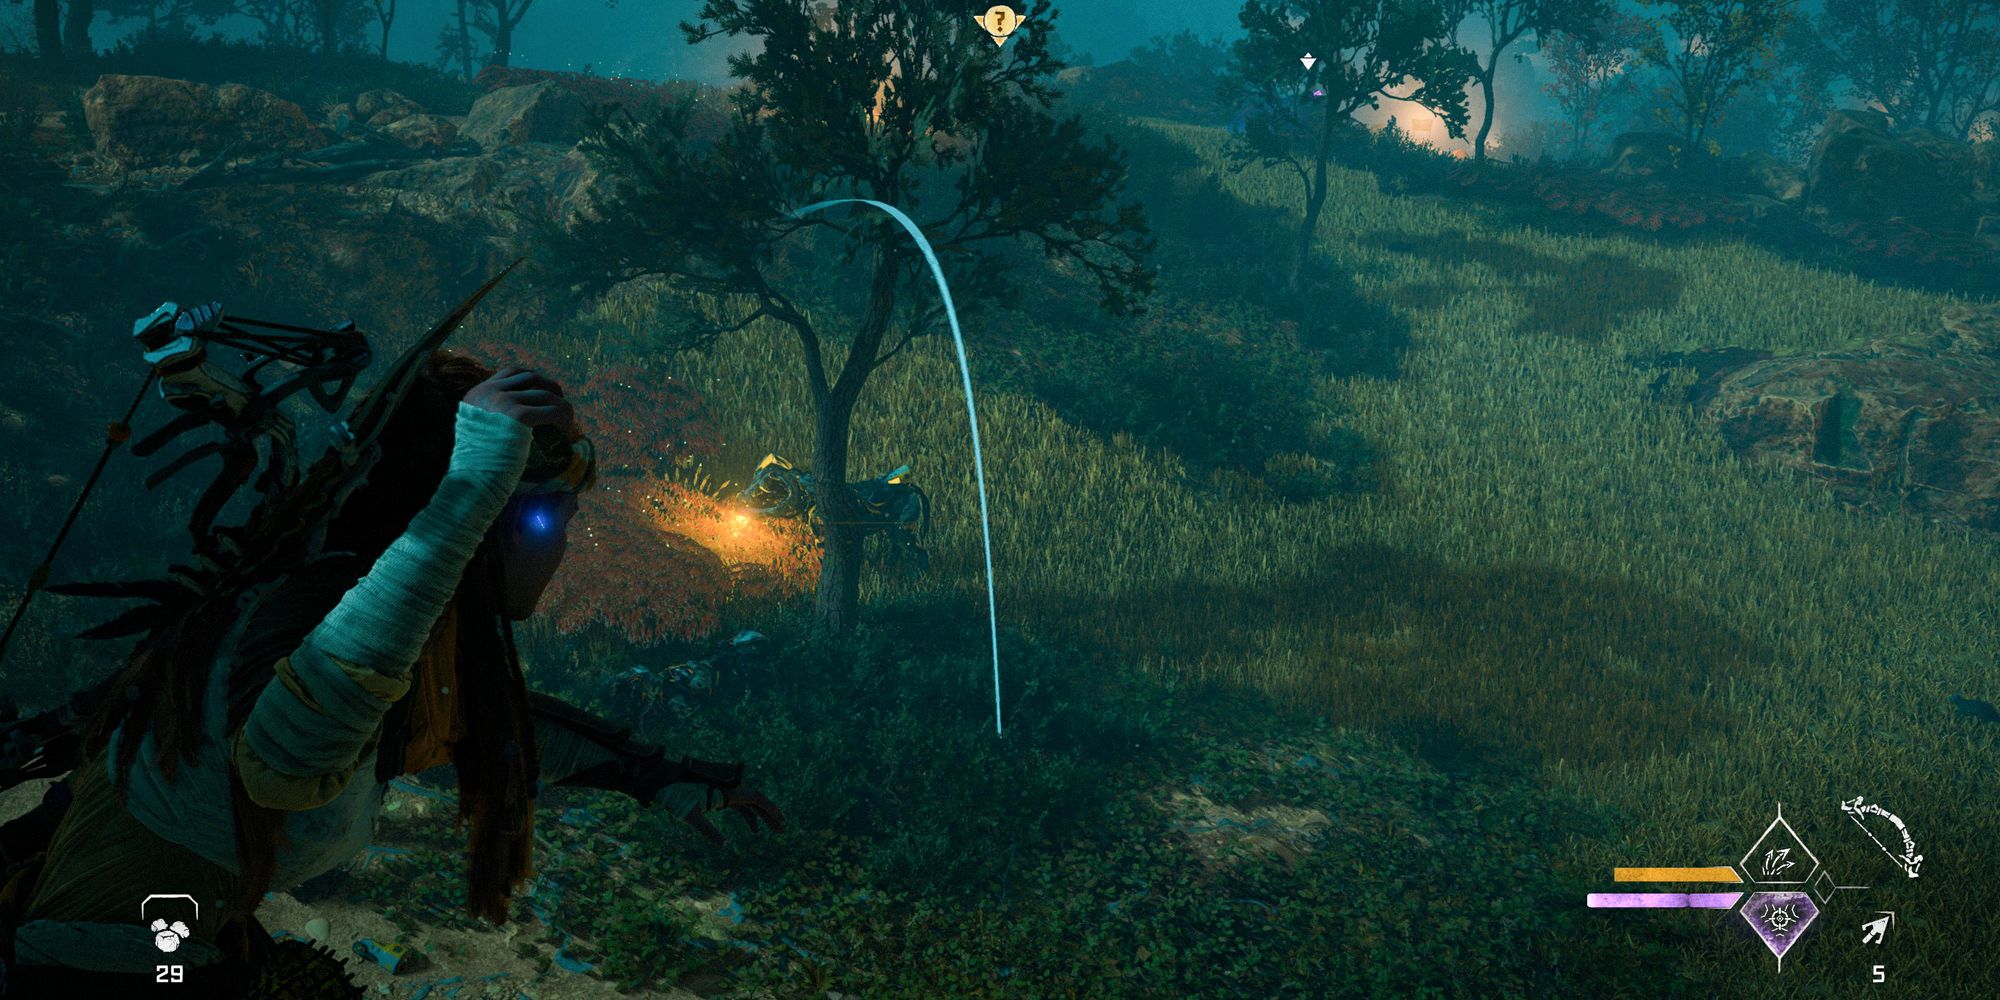 Horizon Forbidden West Aloy aiming a rock at the ground below. A machine is standing near the rock aim location.